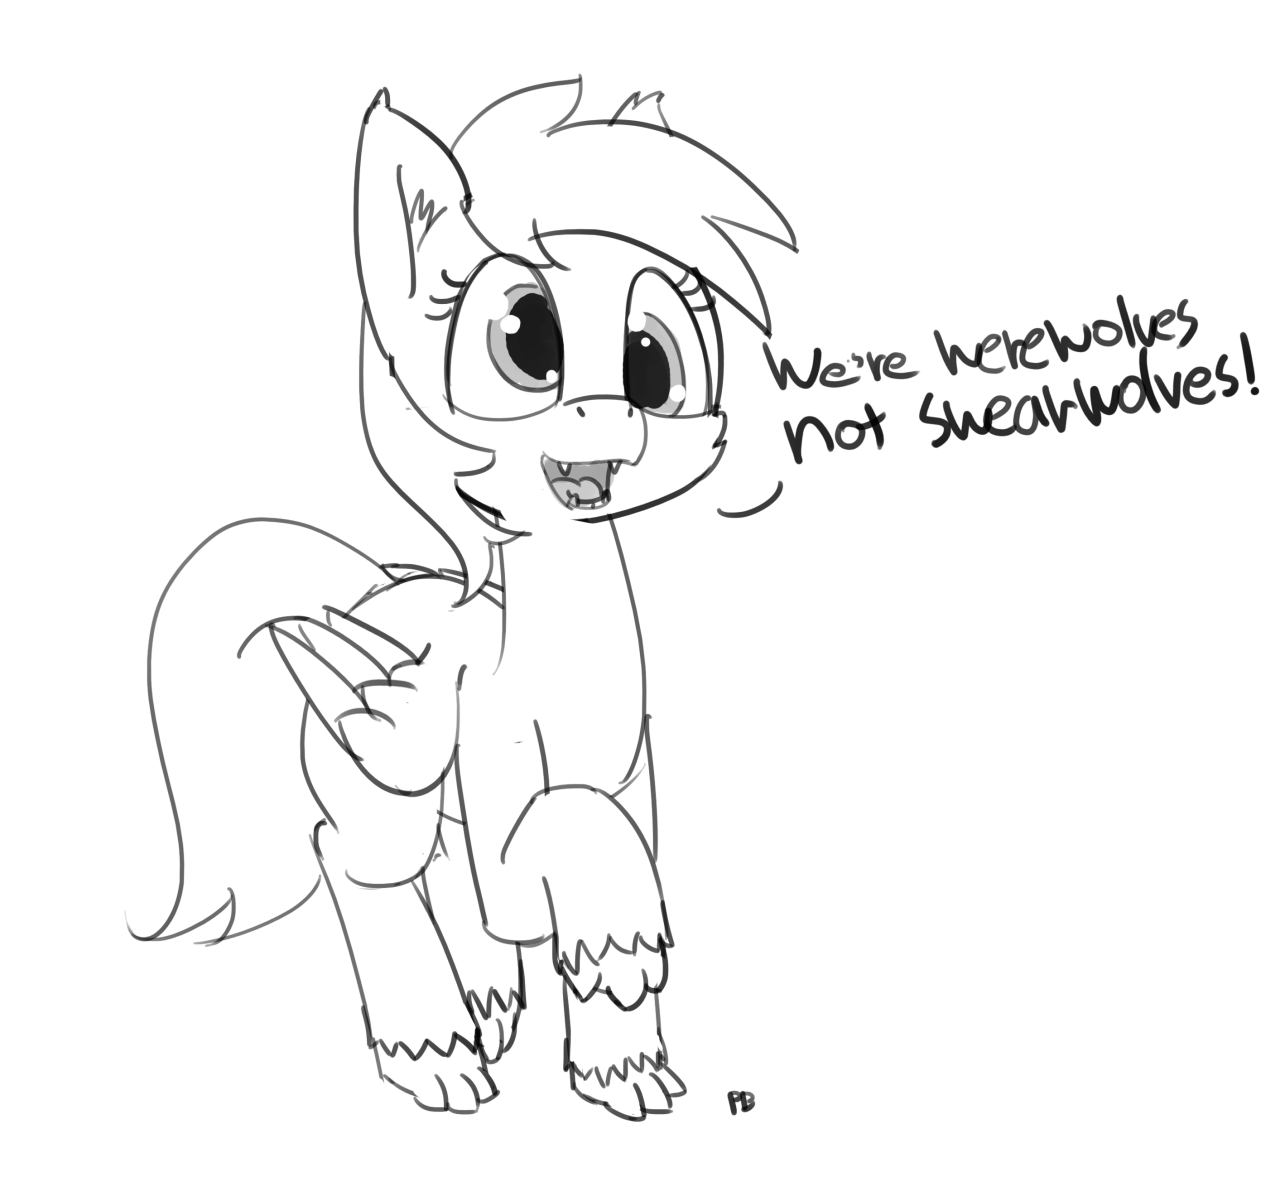 We're werewolves, not swearwolves! - My little pony, Derpy hooves, Real ghouls, Crossover, Pabbley, Crossover